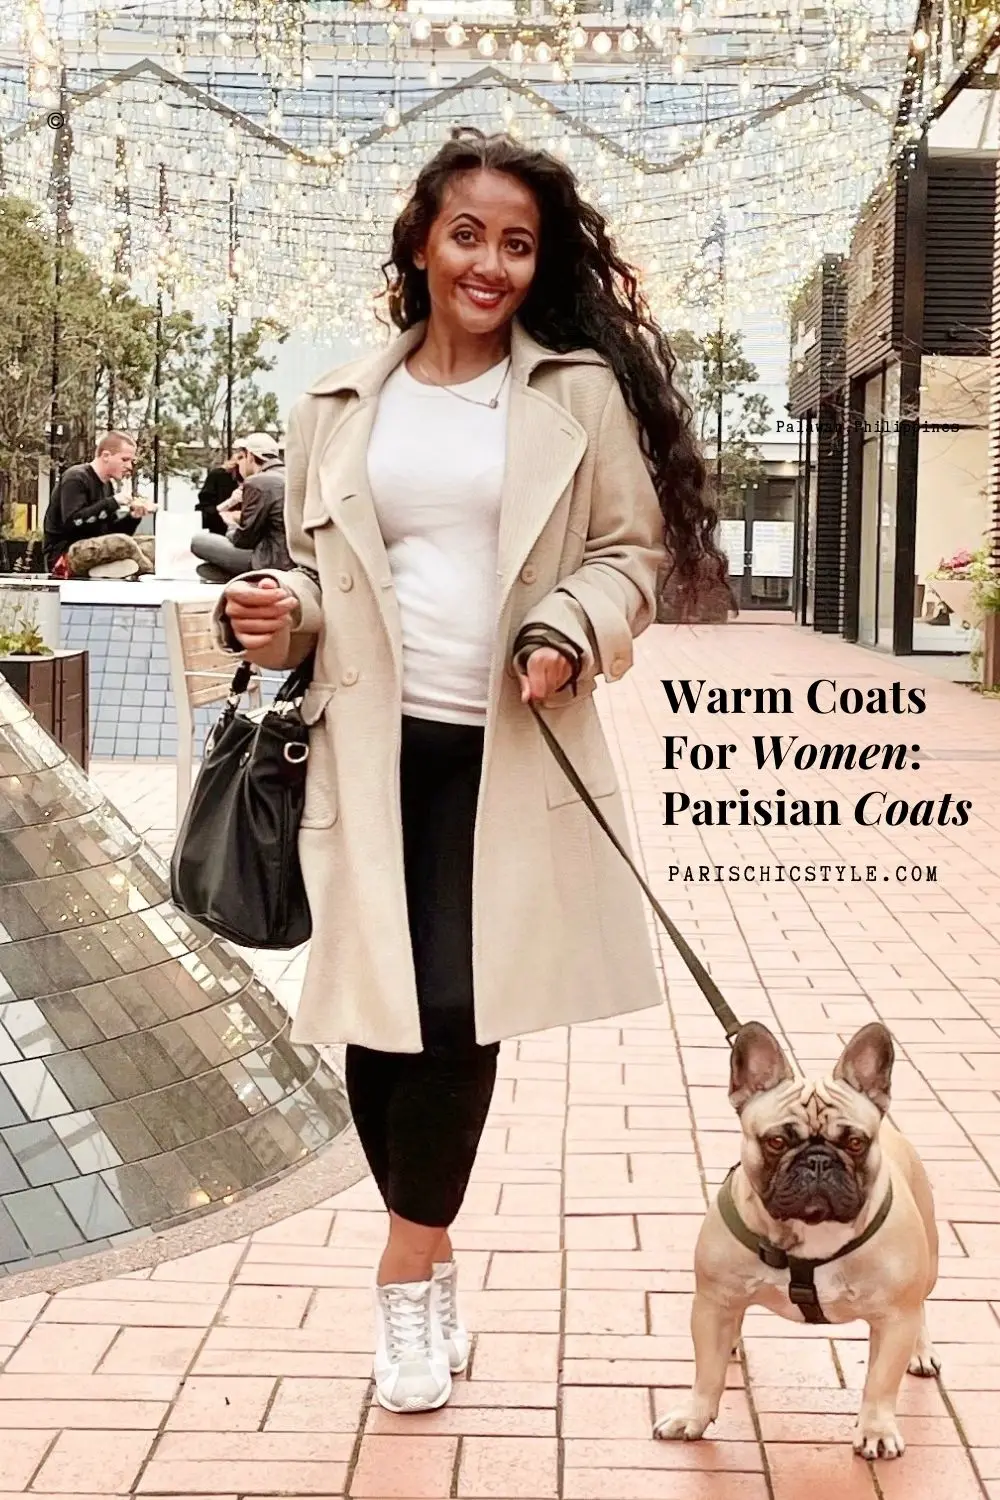 Best Coats For Women Travel Sightseeing Streetstyle Walking Work Weddings Paris Chic Style Trench Coats Peacoats Faux Fur Teddy Coats Puffer